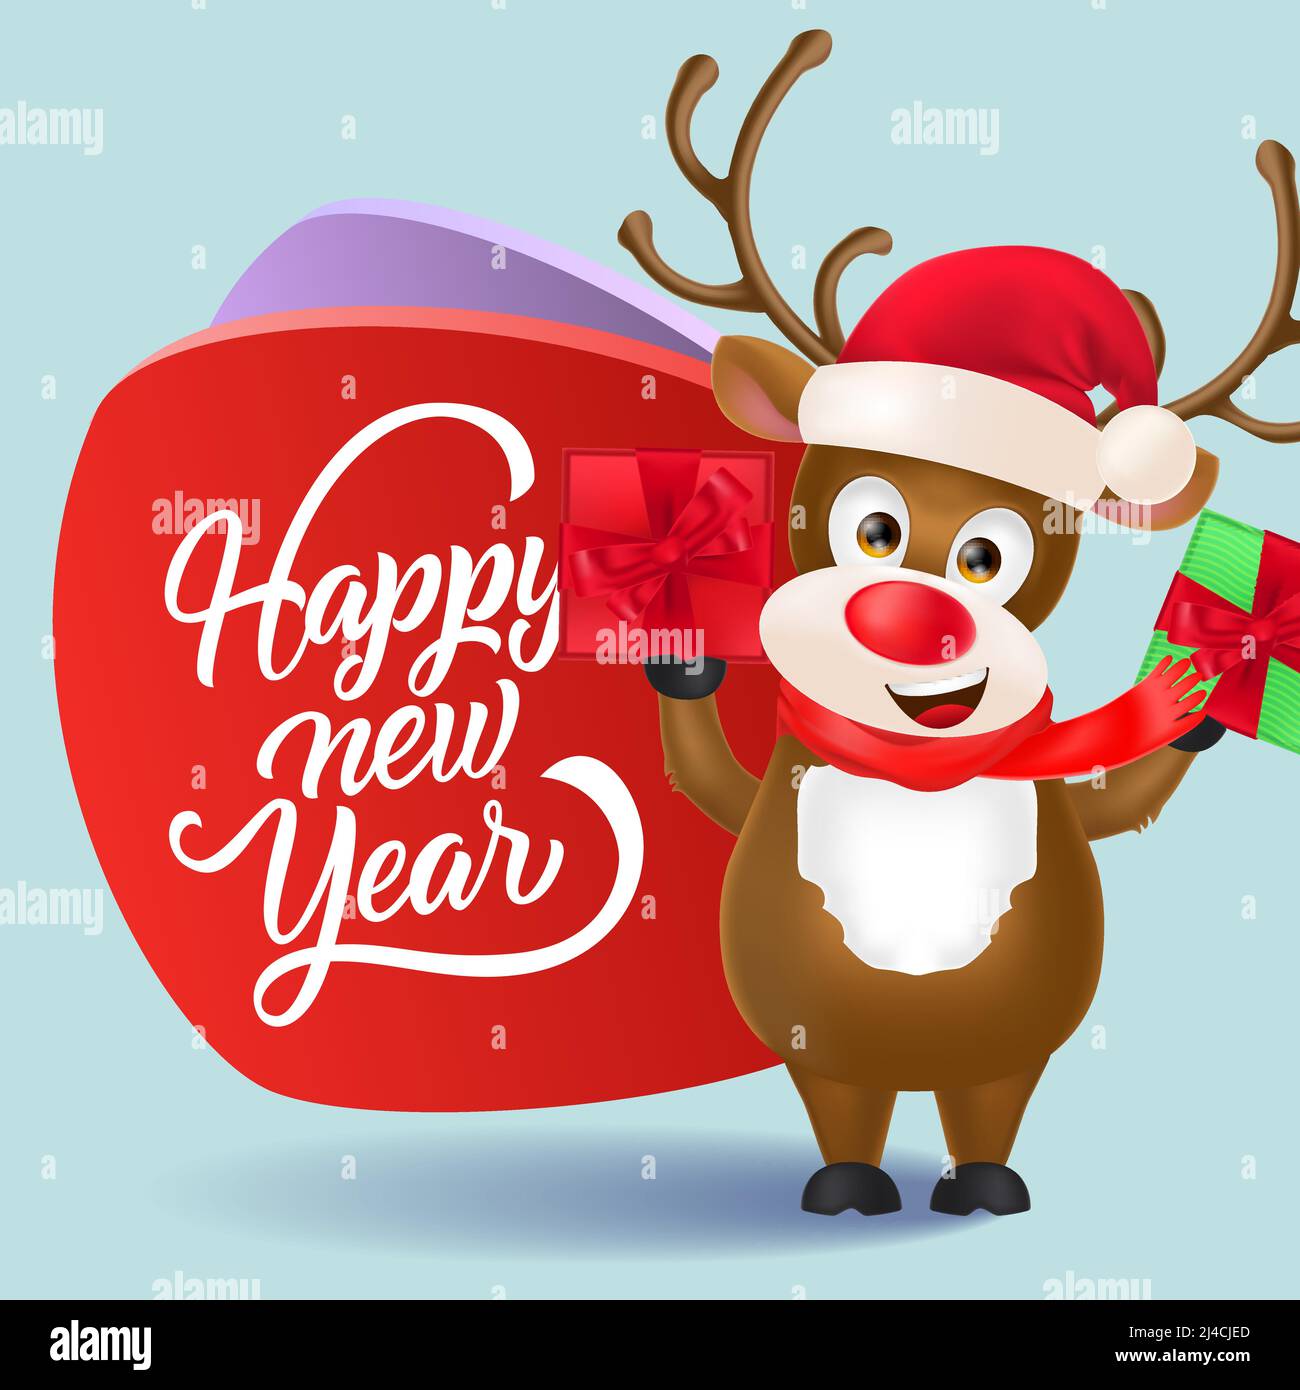 Images Page Alamy - rudolph Vector and santa For - Stock 3